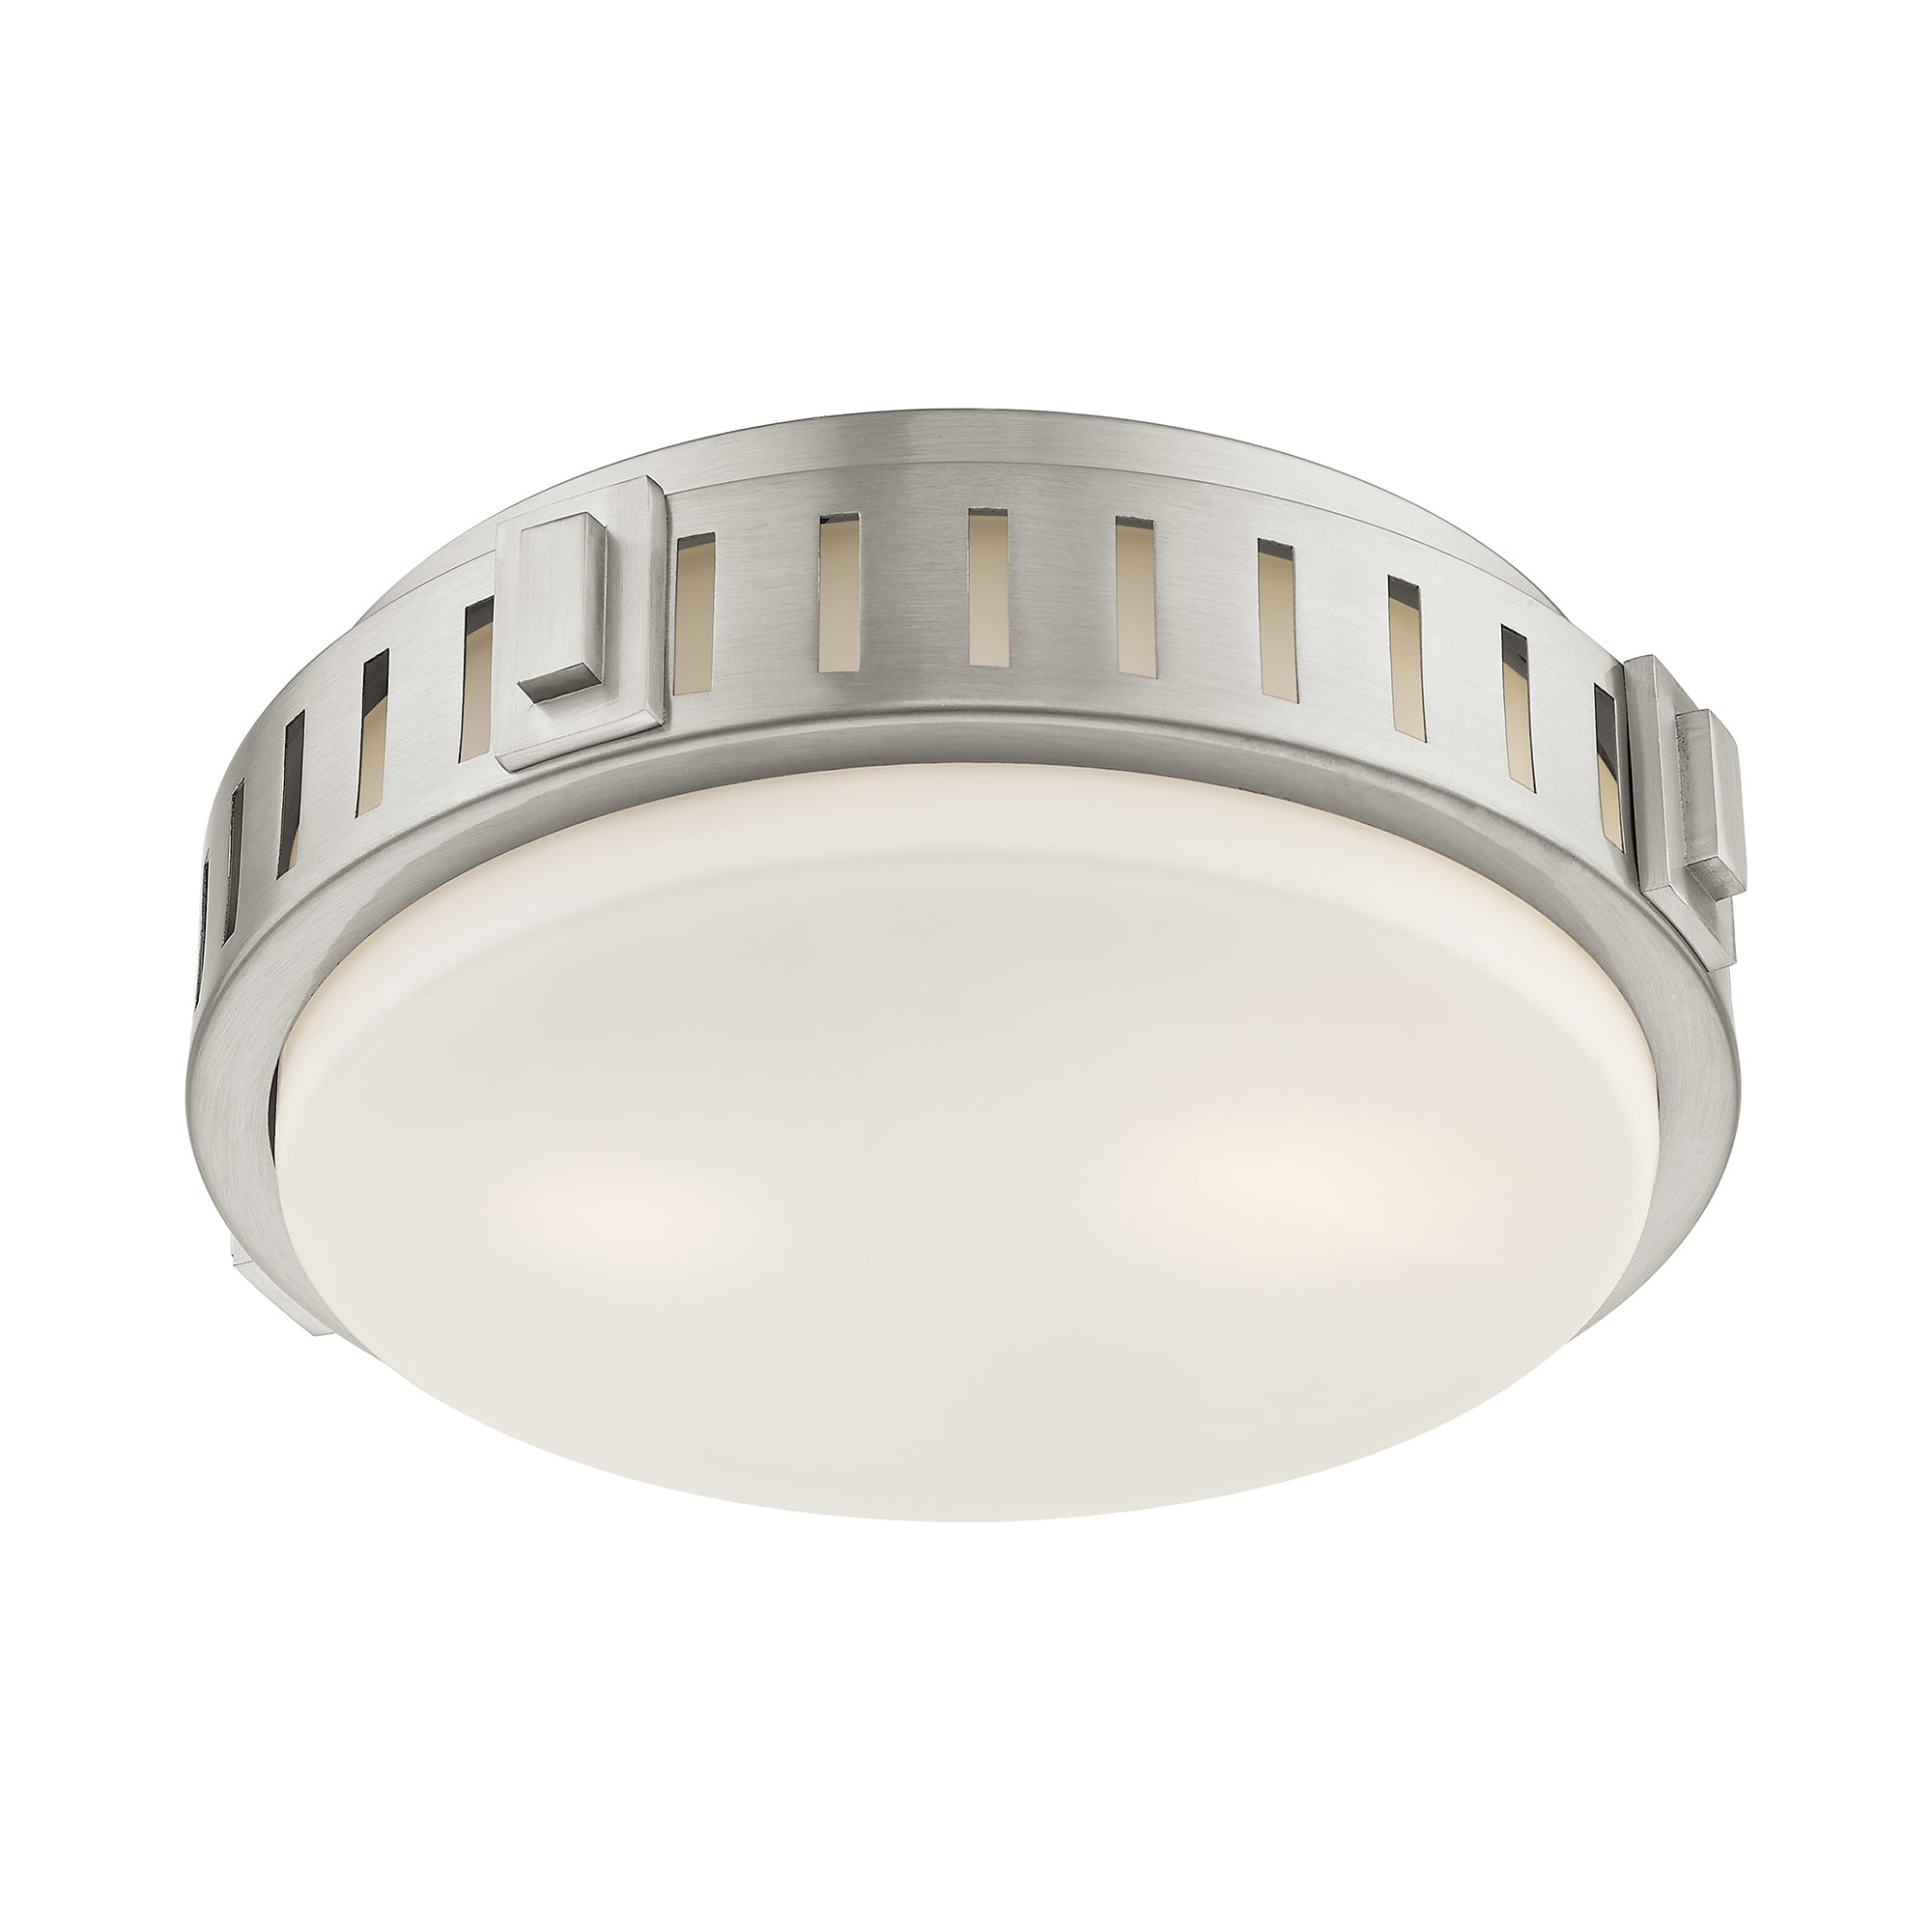 B/S Livex Lighting 50921-91 Americana Two Light Ceiling Mount from Cortland Collection in Pwt Finish Slvr Nckl Brushed Nickel